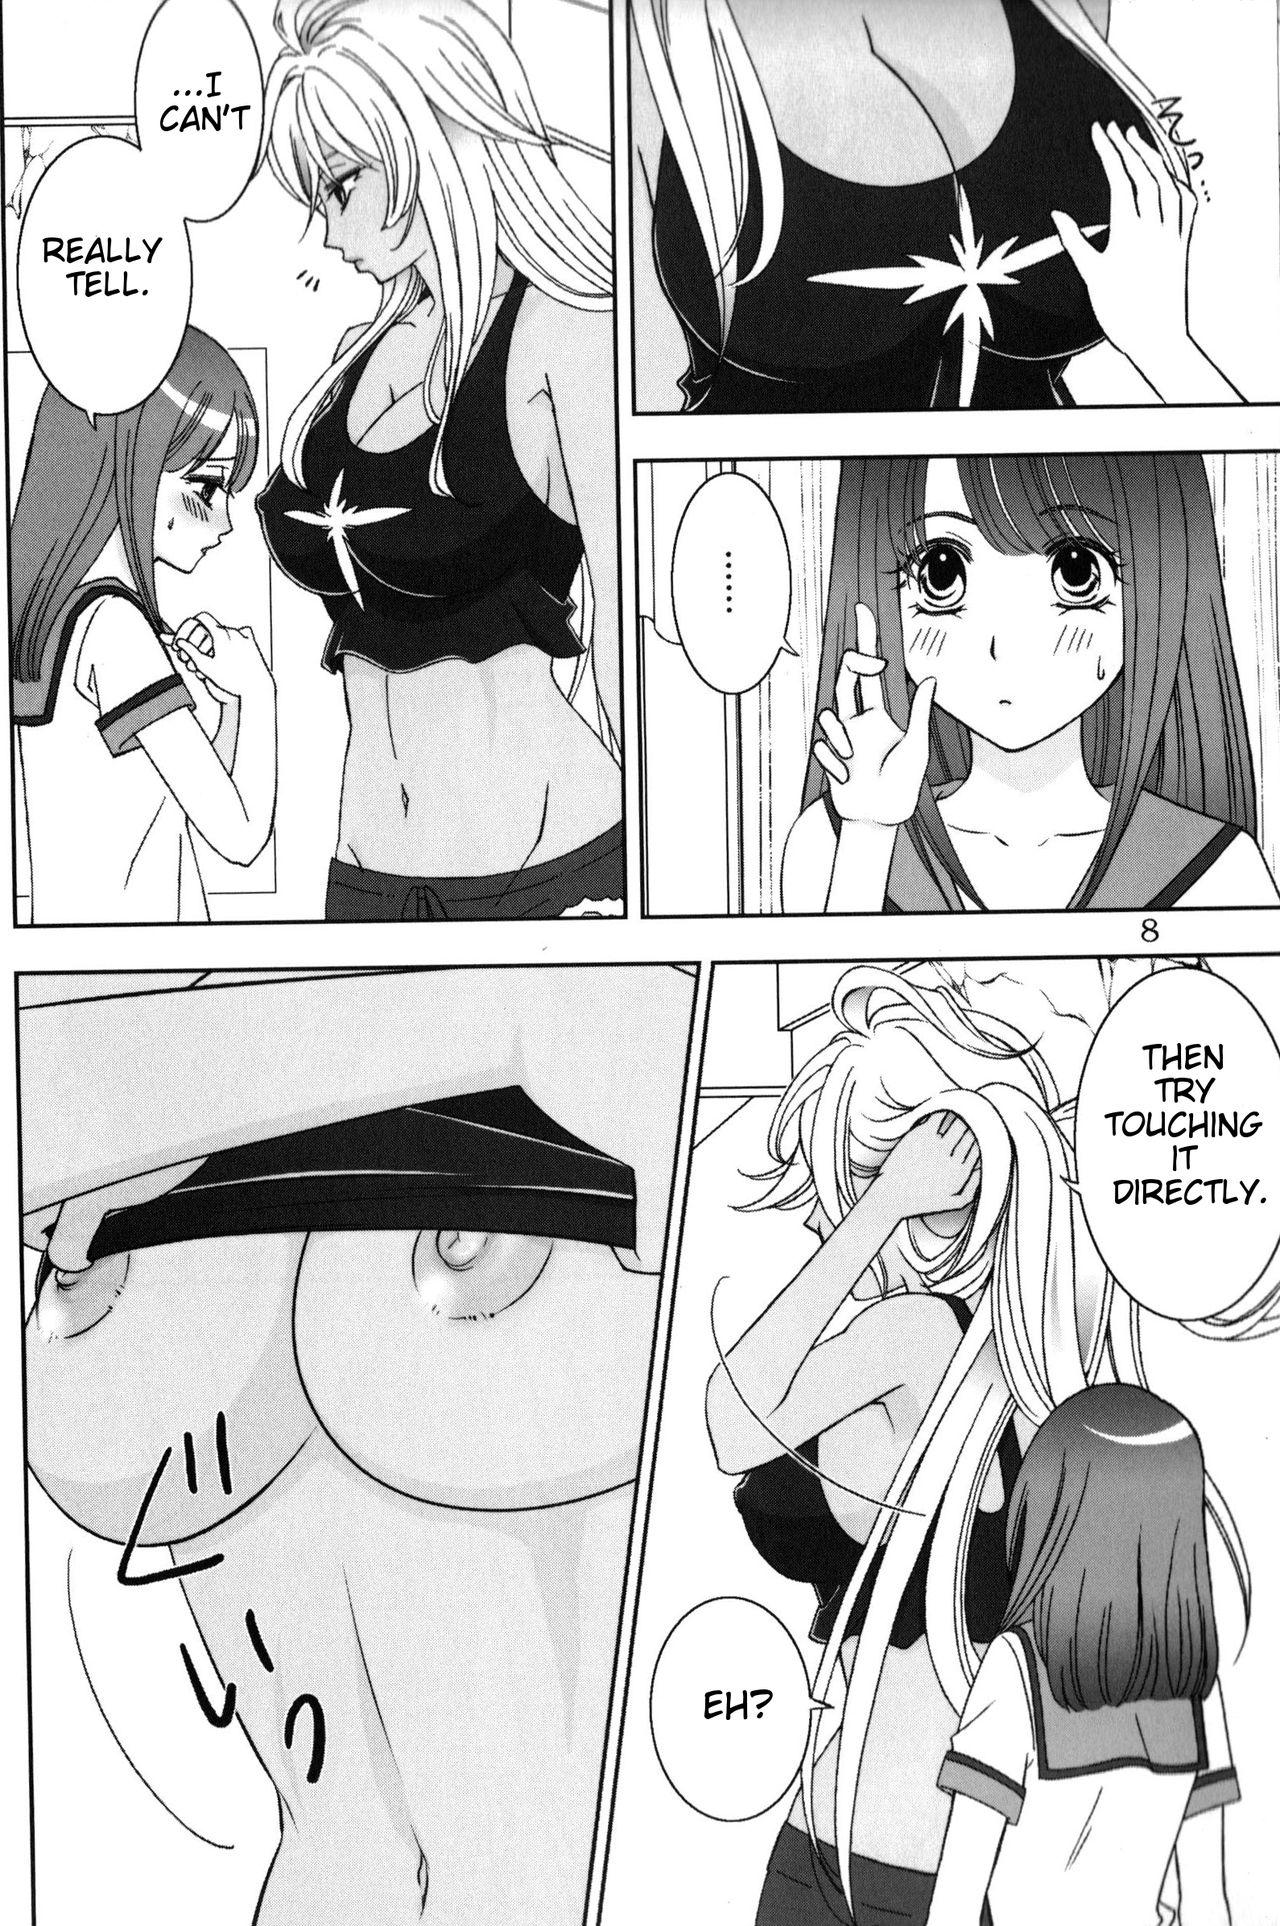 Party Give it Away - Valkyrie drive Nasty - Page 7